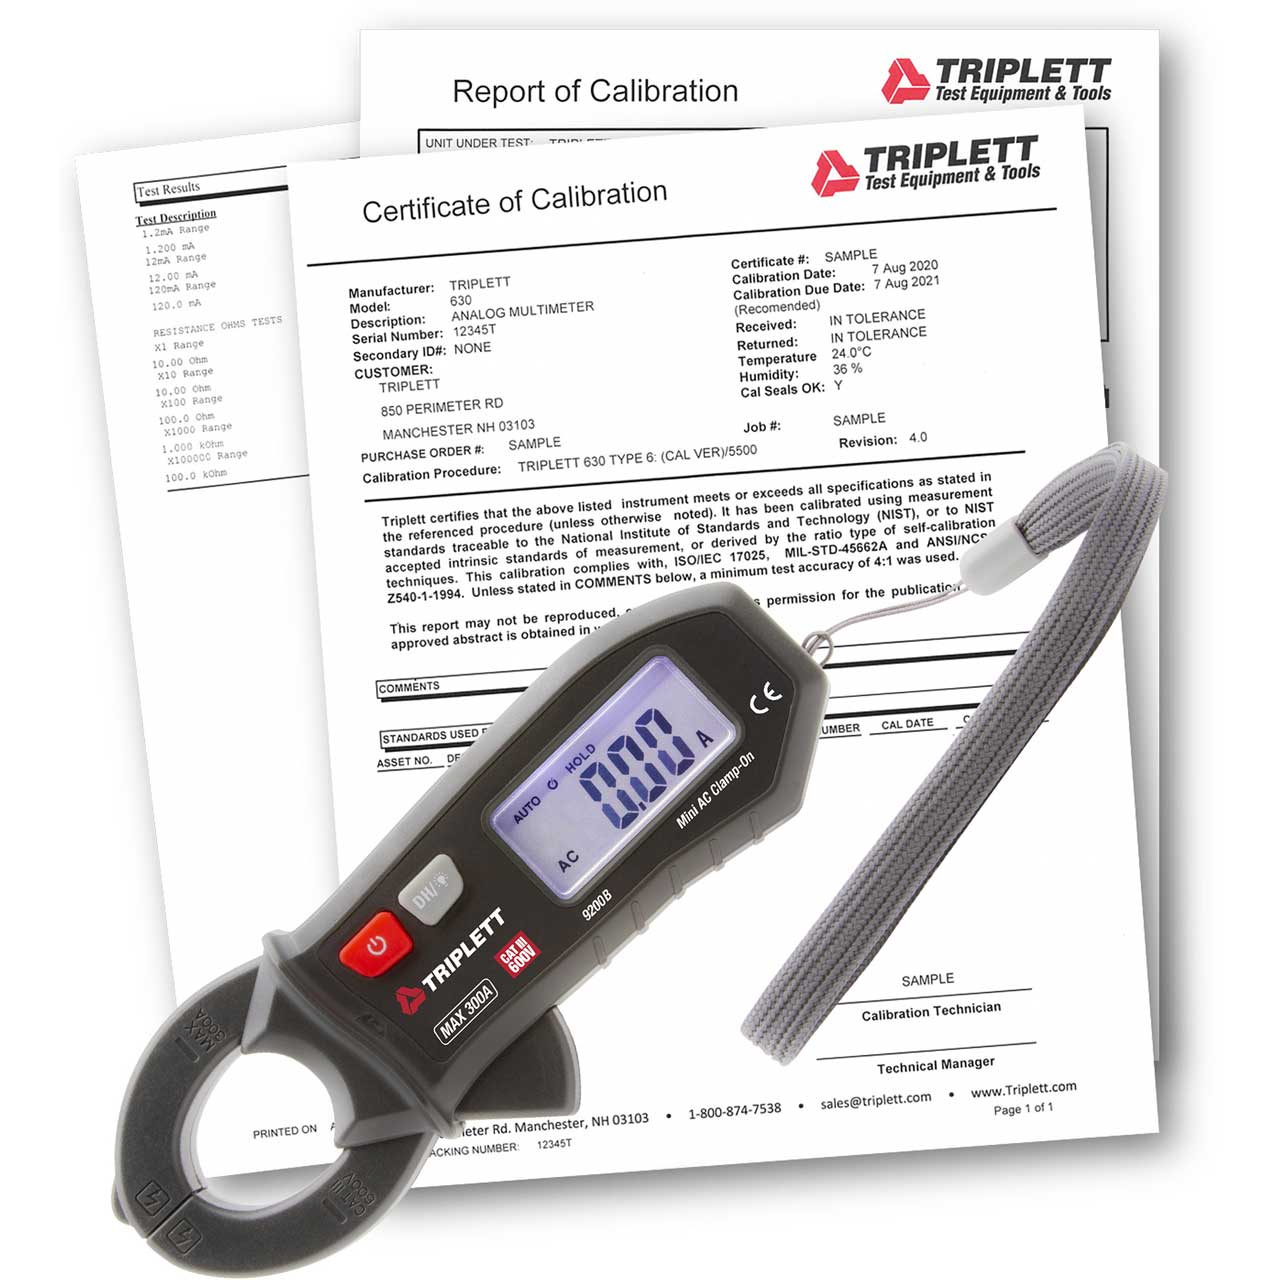 Triplett 9200B-NIST 300A True RMS AC Mini Clamp Meter with Cert of Traceability to NIST